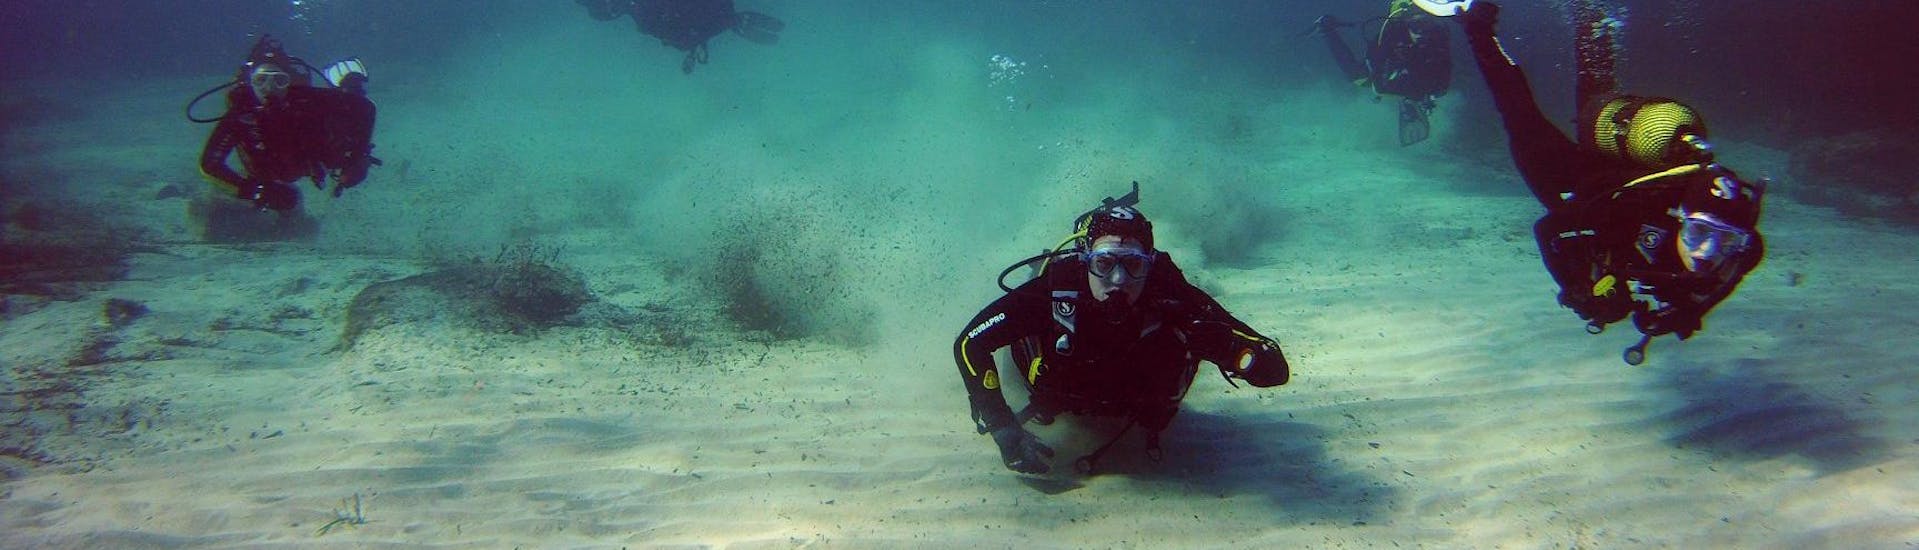 Scuba Diving Course for Beginners - PADI Open Water Diver with Norway Dive Mallorca - Hero image